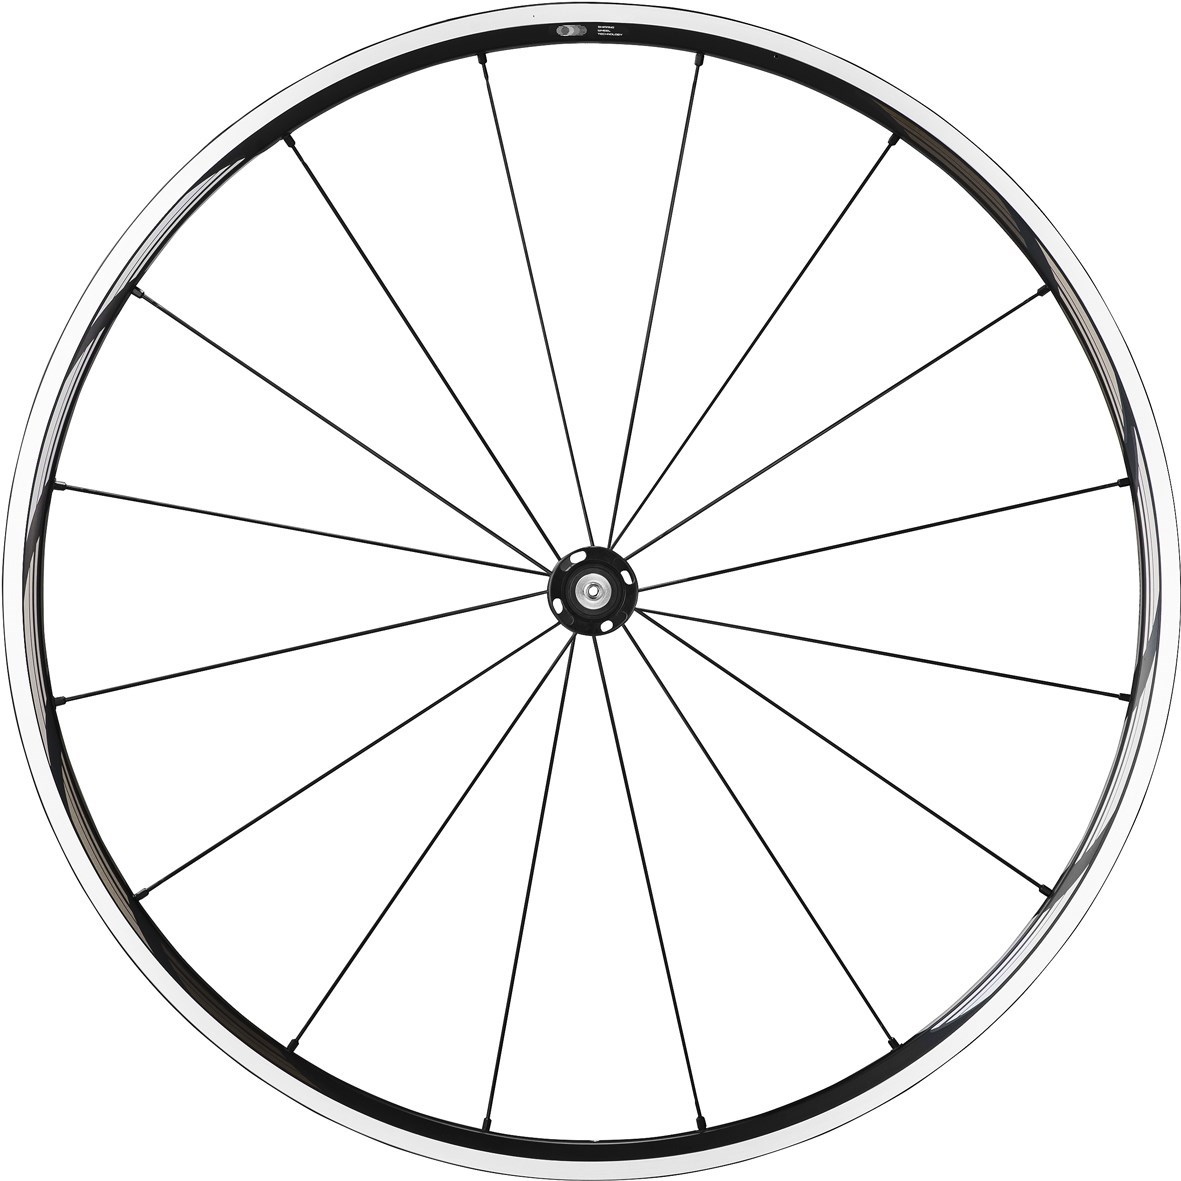 Shimano WH-RS610-TL Wheel - Tubeless Ready Clincher 24 mm - Black - Front product image